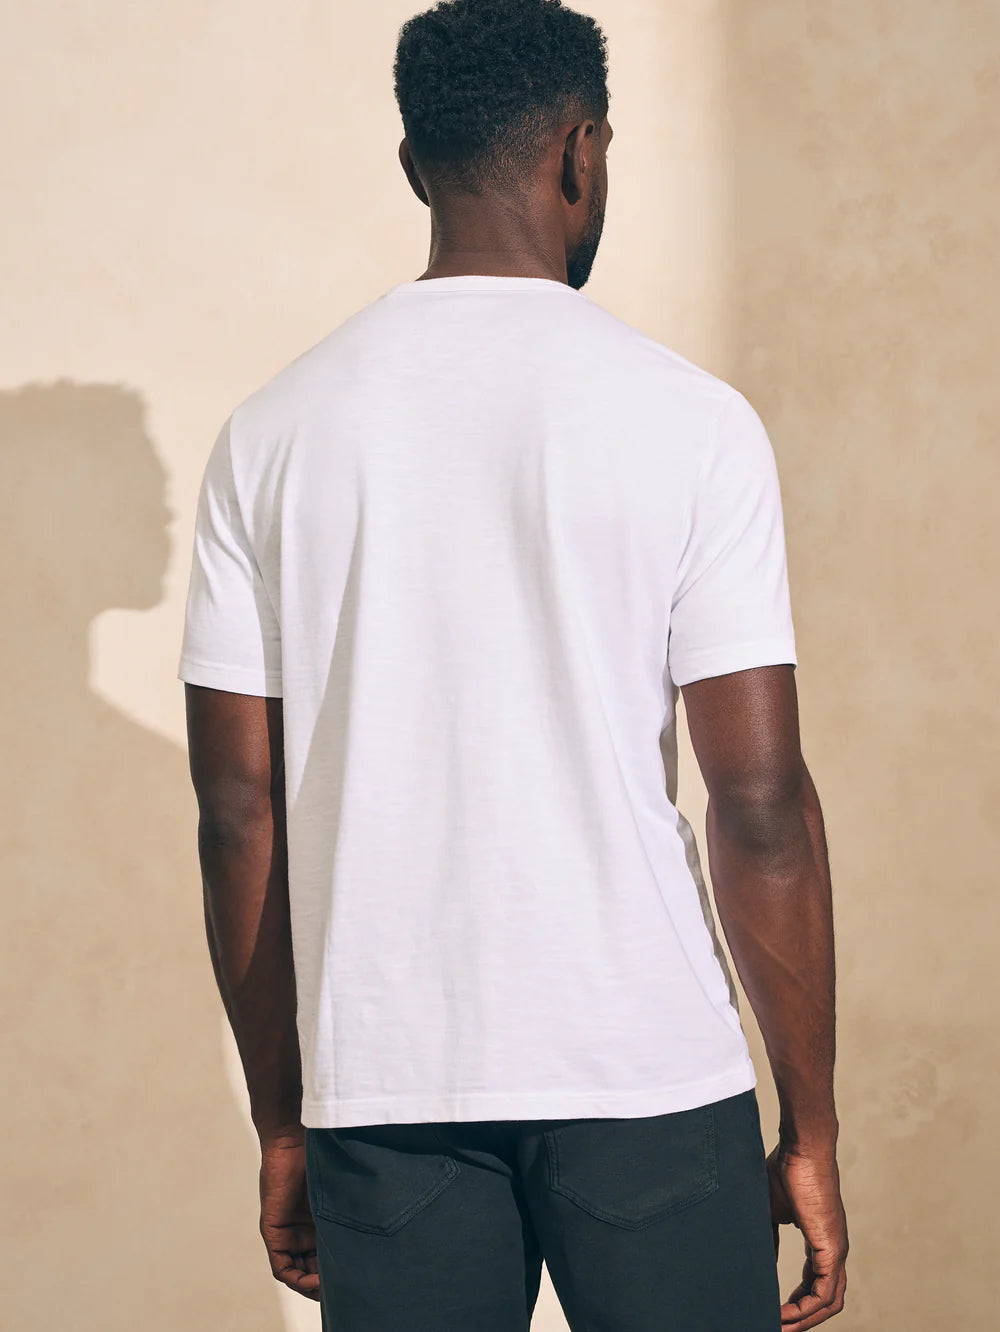 Back view of man wearing a white short sleeve t-shirt by Faherty